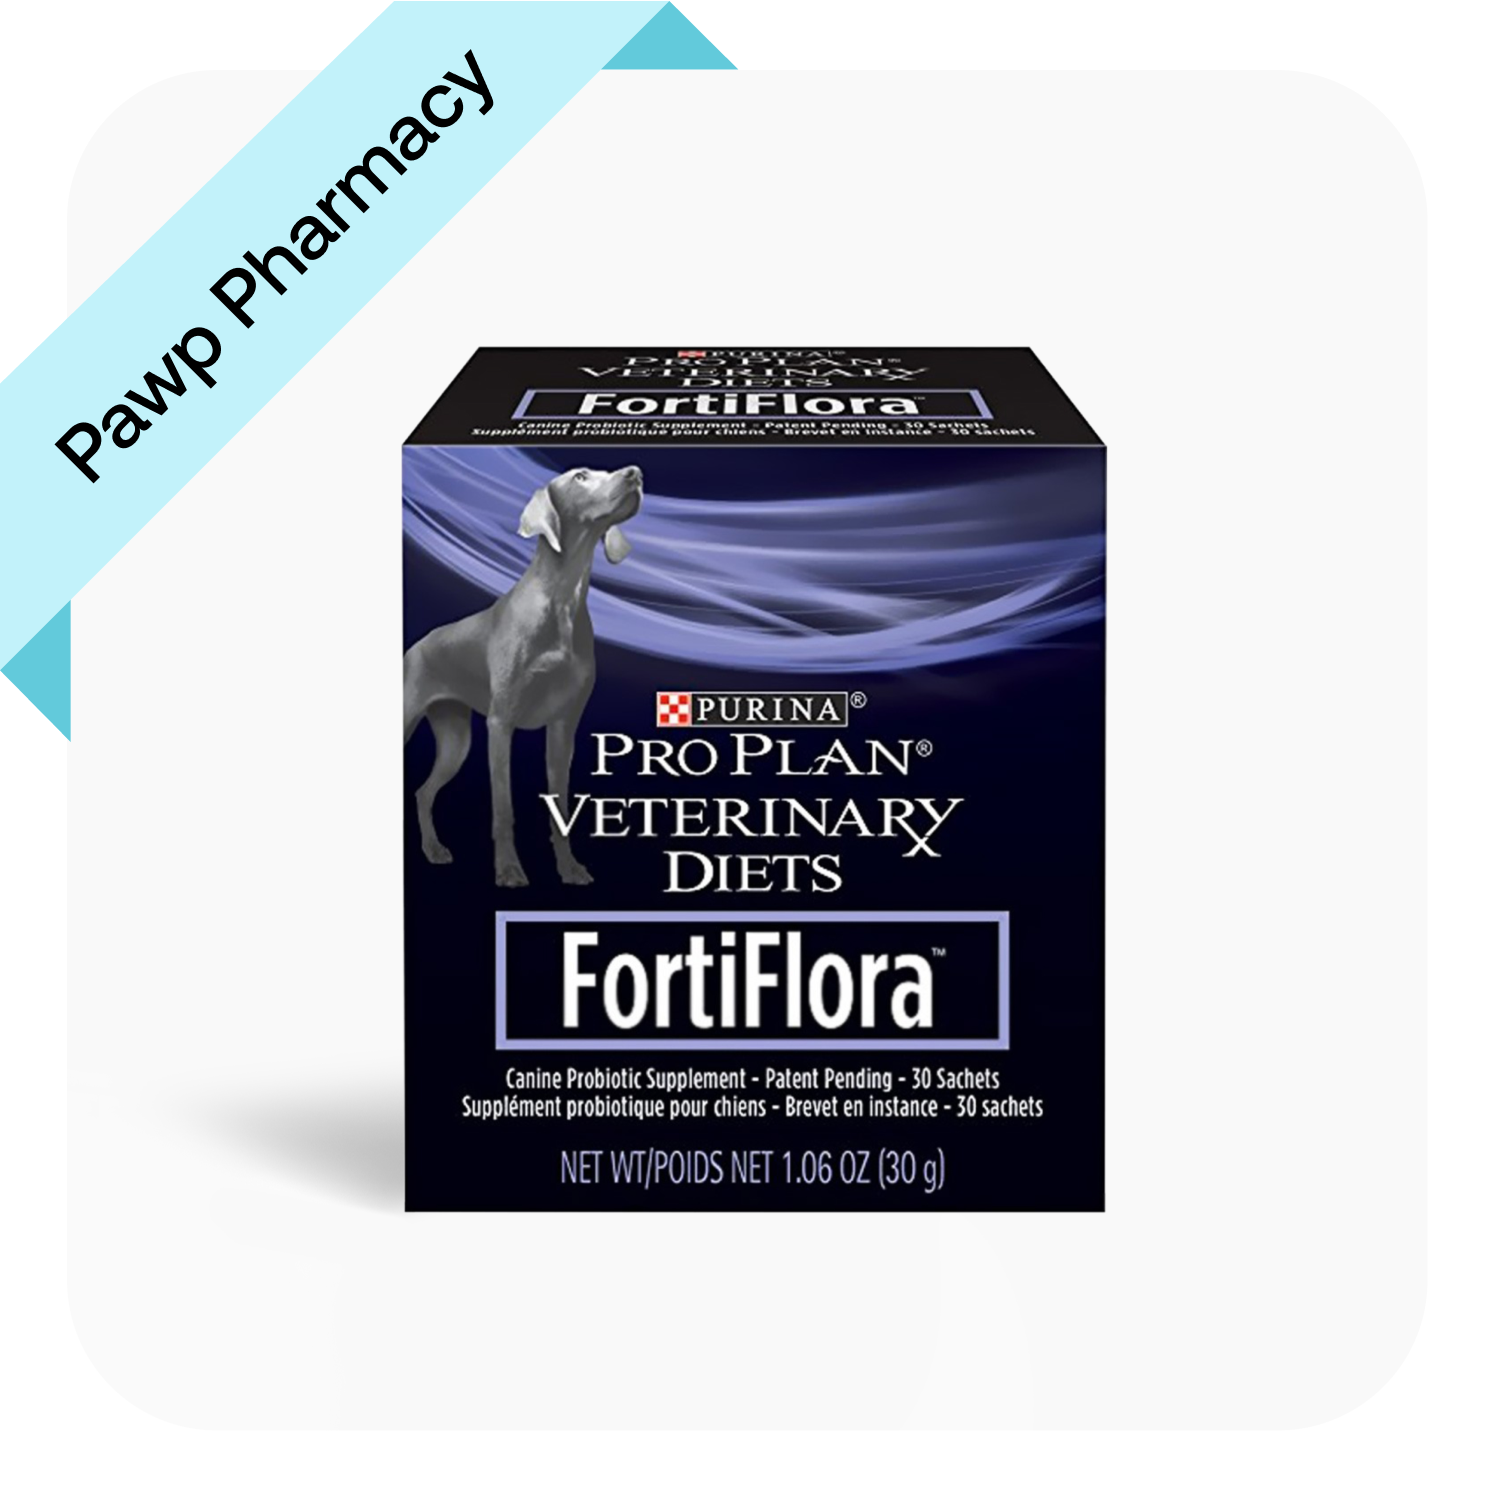 Pawp Pharmacy Product - FortiFlora for Dogs